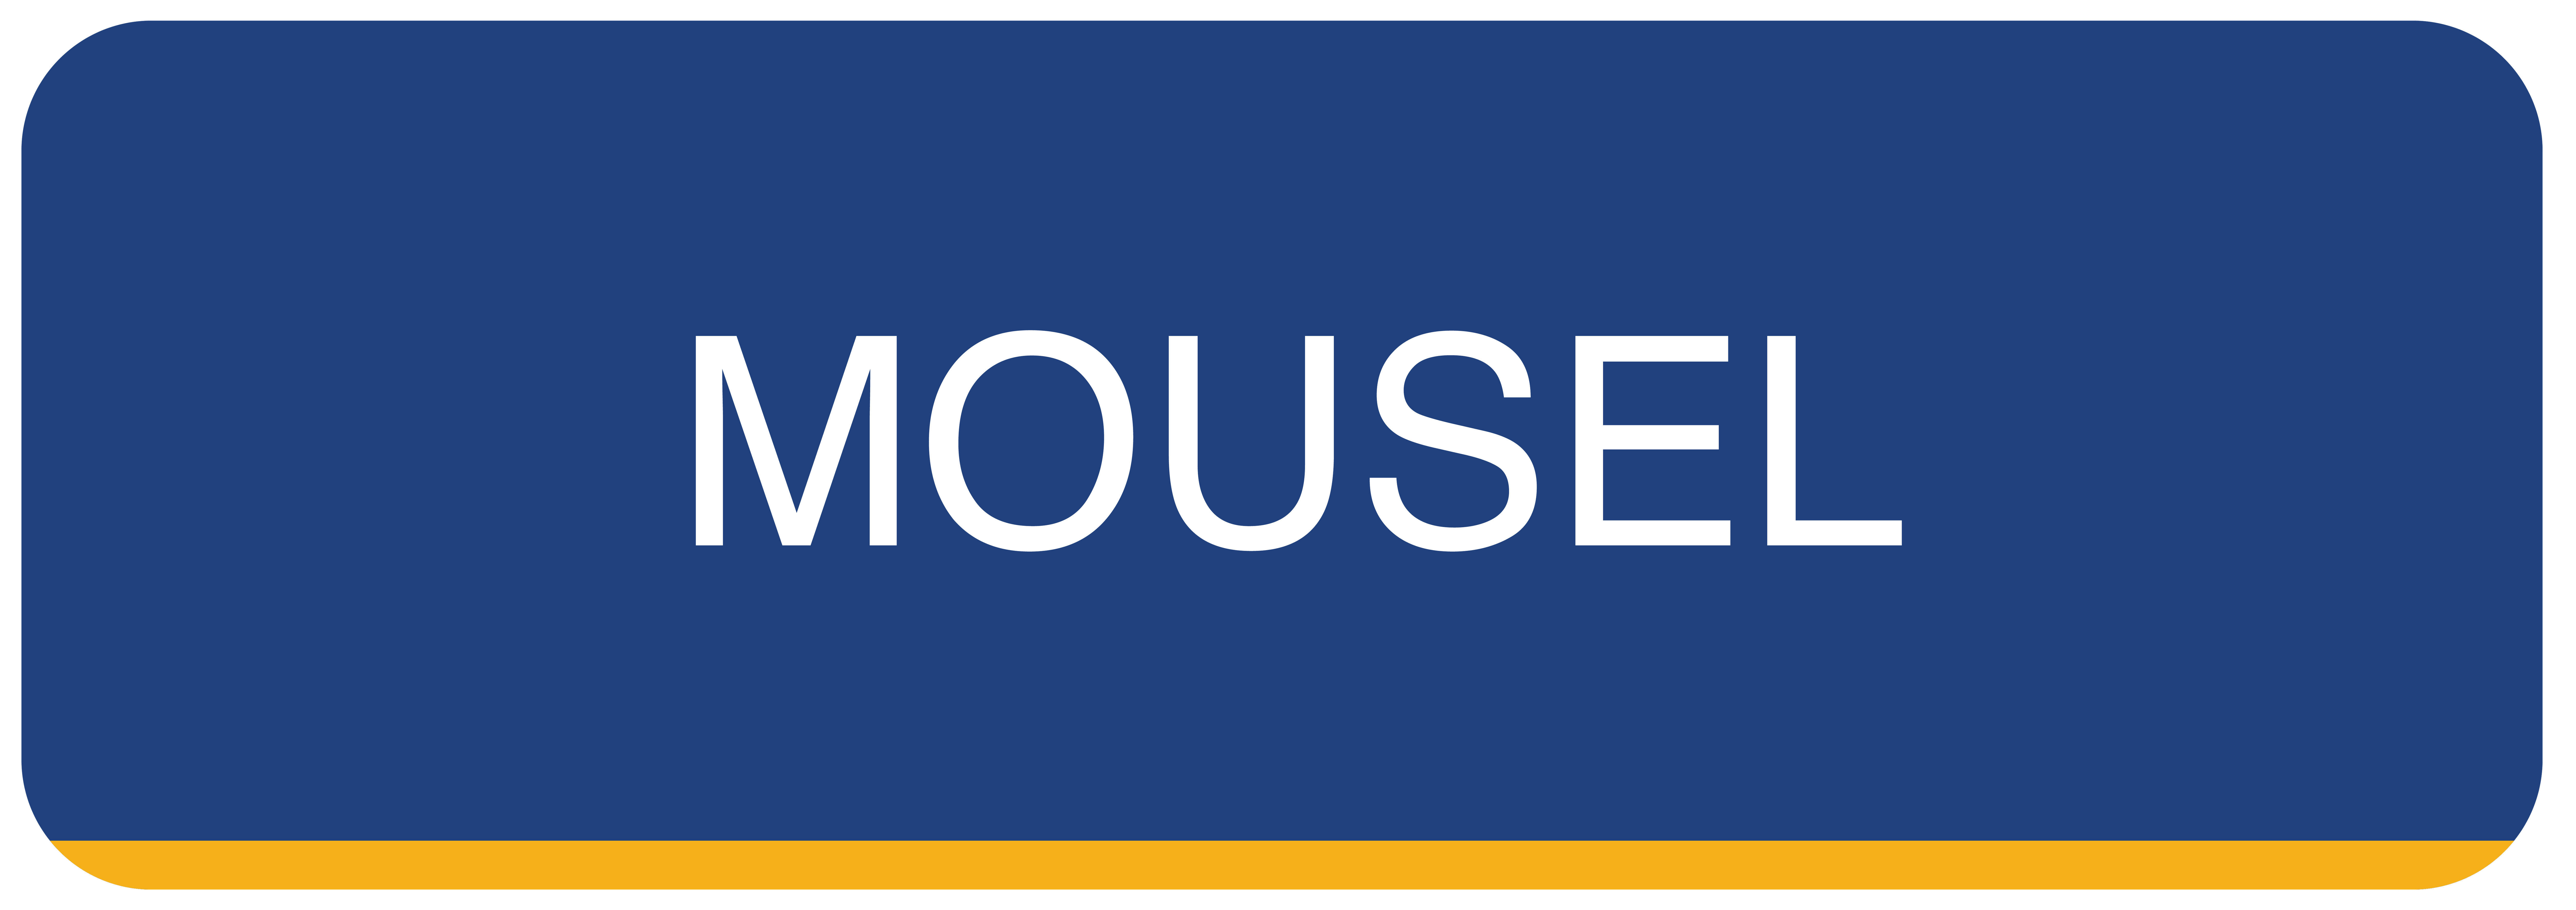 mousel